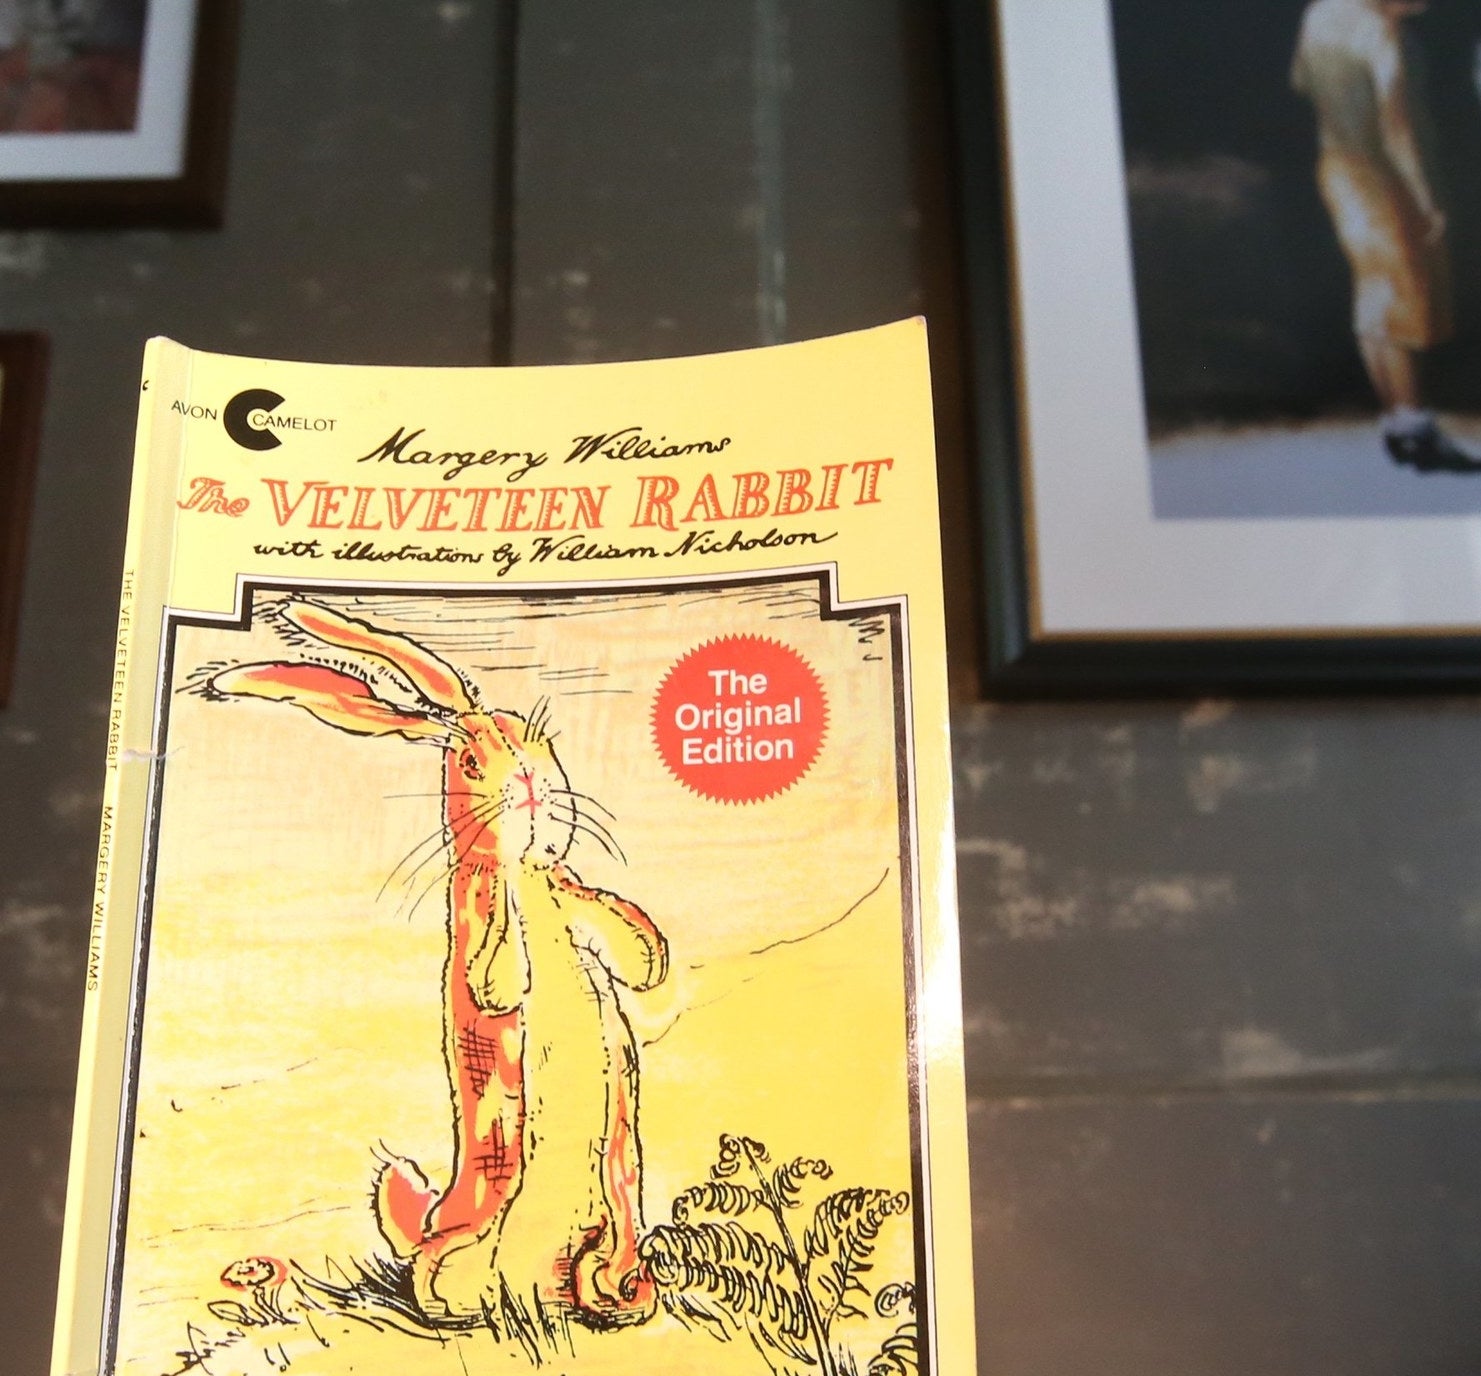 An original edition of The Velveteen Rabbit standing on a table